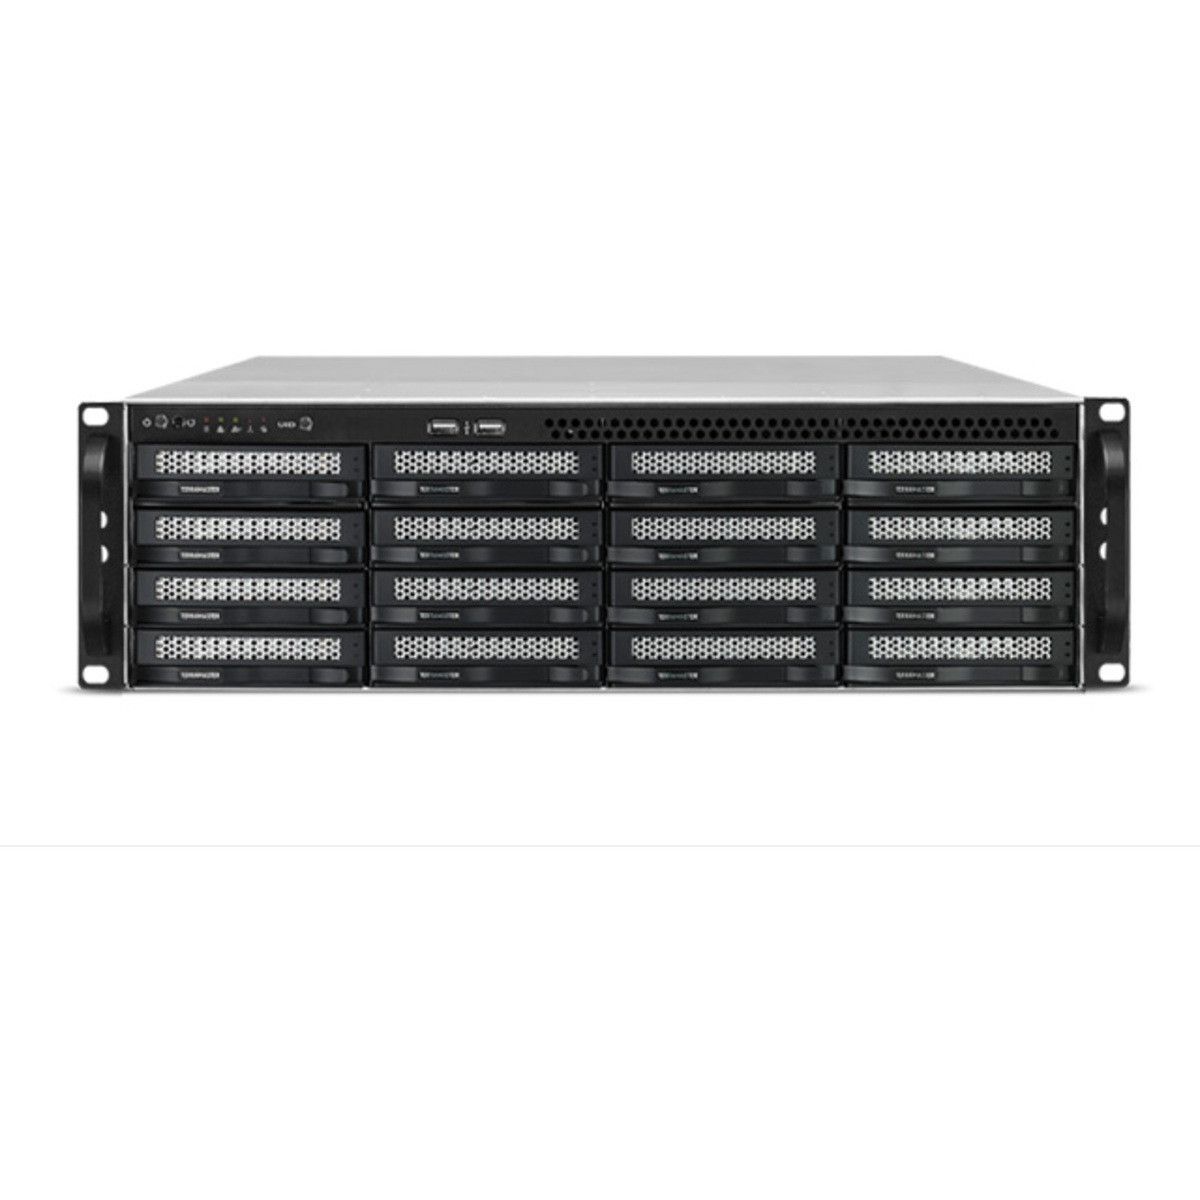 TerraMaster U16-722-2224 120tb 16-Bay RackMount Large Business / Enterprise NAS - Network Attached Storage Device 10x12tb Seagate IronWolf Pro ST12000NT001 3.5 7200rpm SATA 6Gb/s HDD NAS Class Drives Installed - Burn-In Tested - ON SALE U16-722-2224